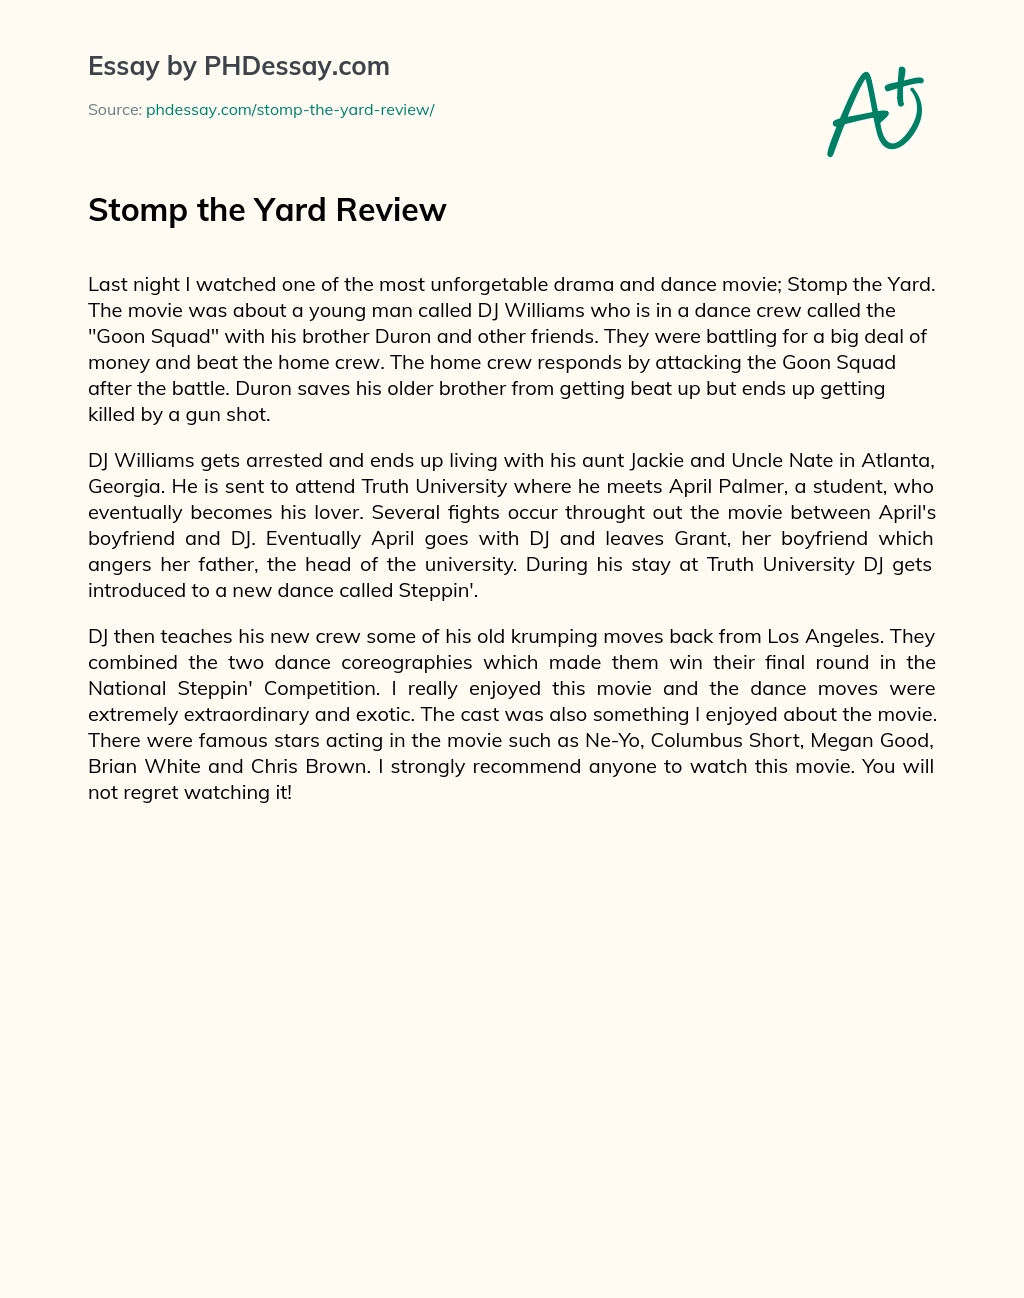 Stomp the Yard Review essay